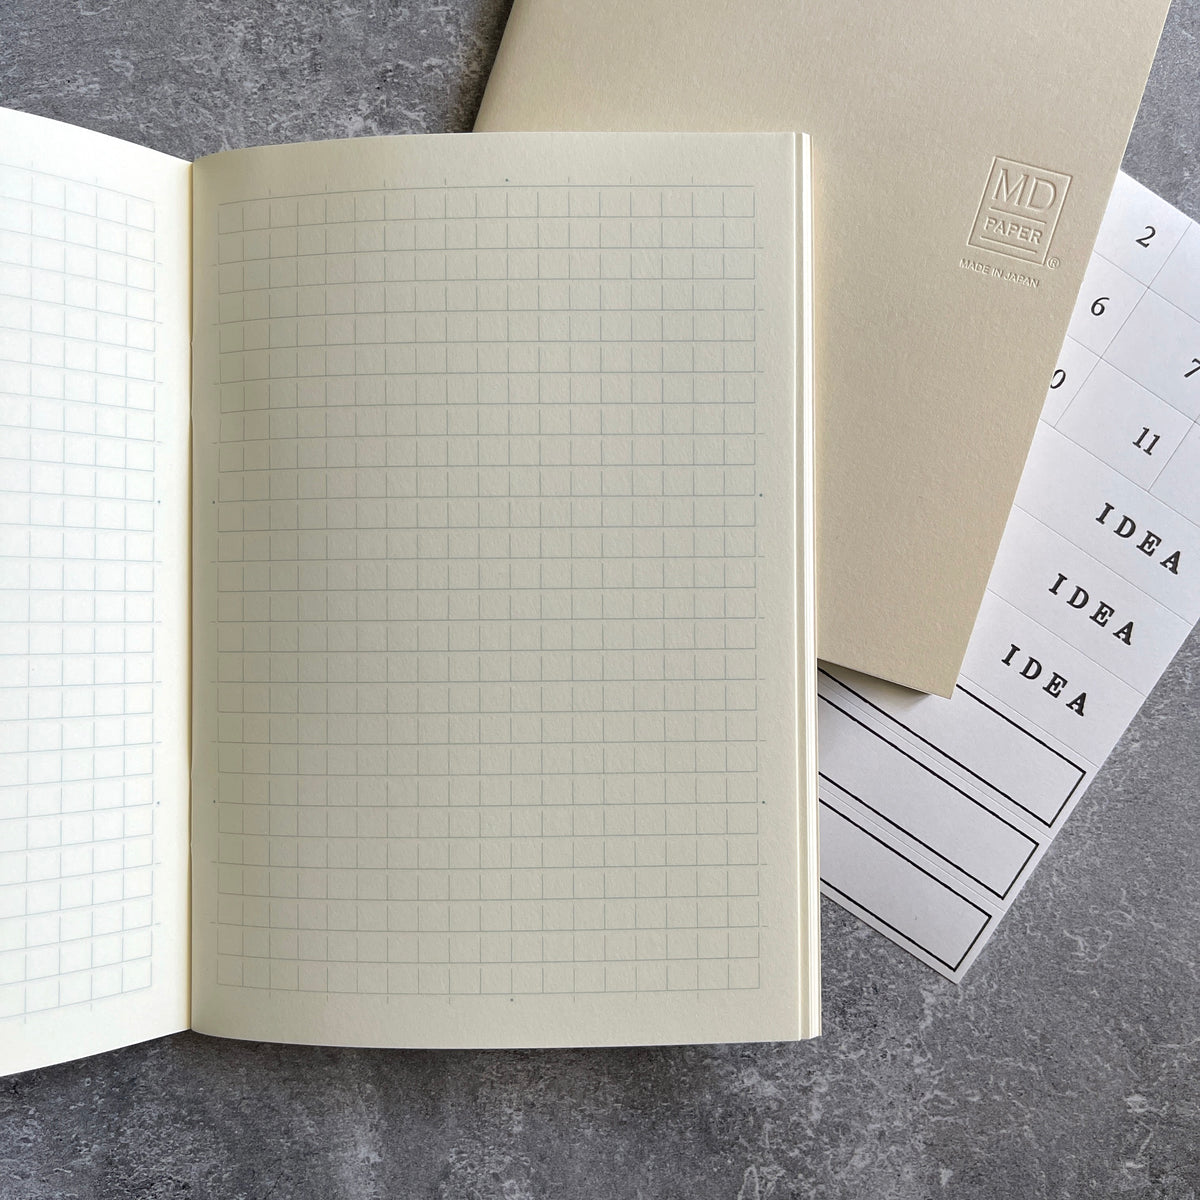 [MD] LIGHT Notebook Grid - pack of 3 (A6)